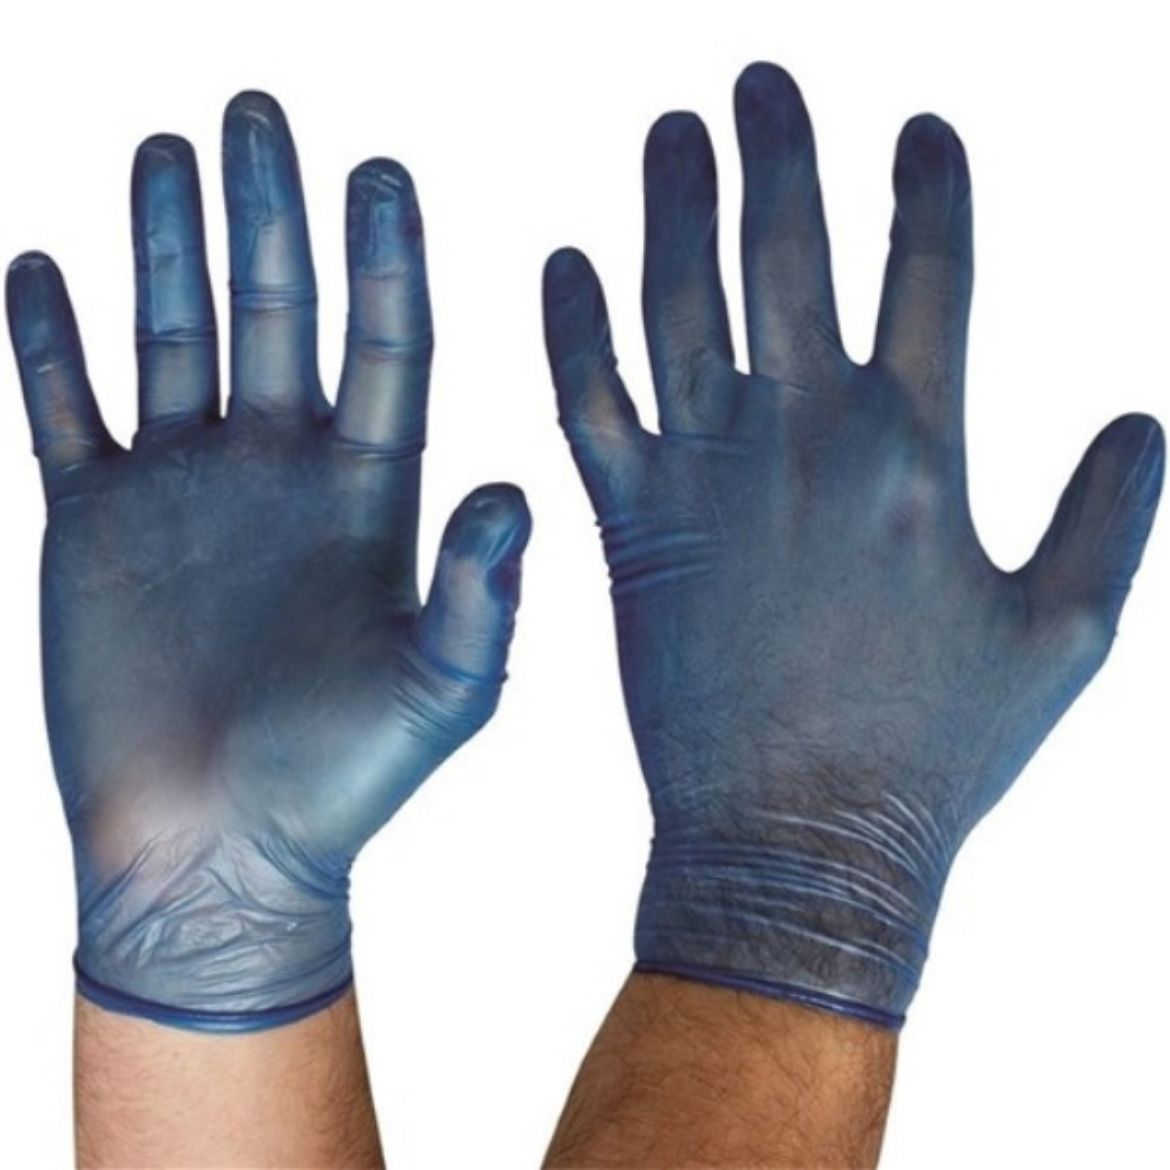 Picture of BLUE, POWDER FREE GLOVES. AVAILABLE IN SIZES S/M/L